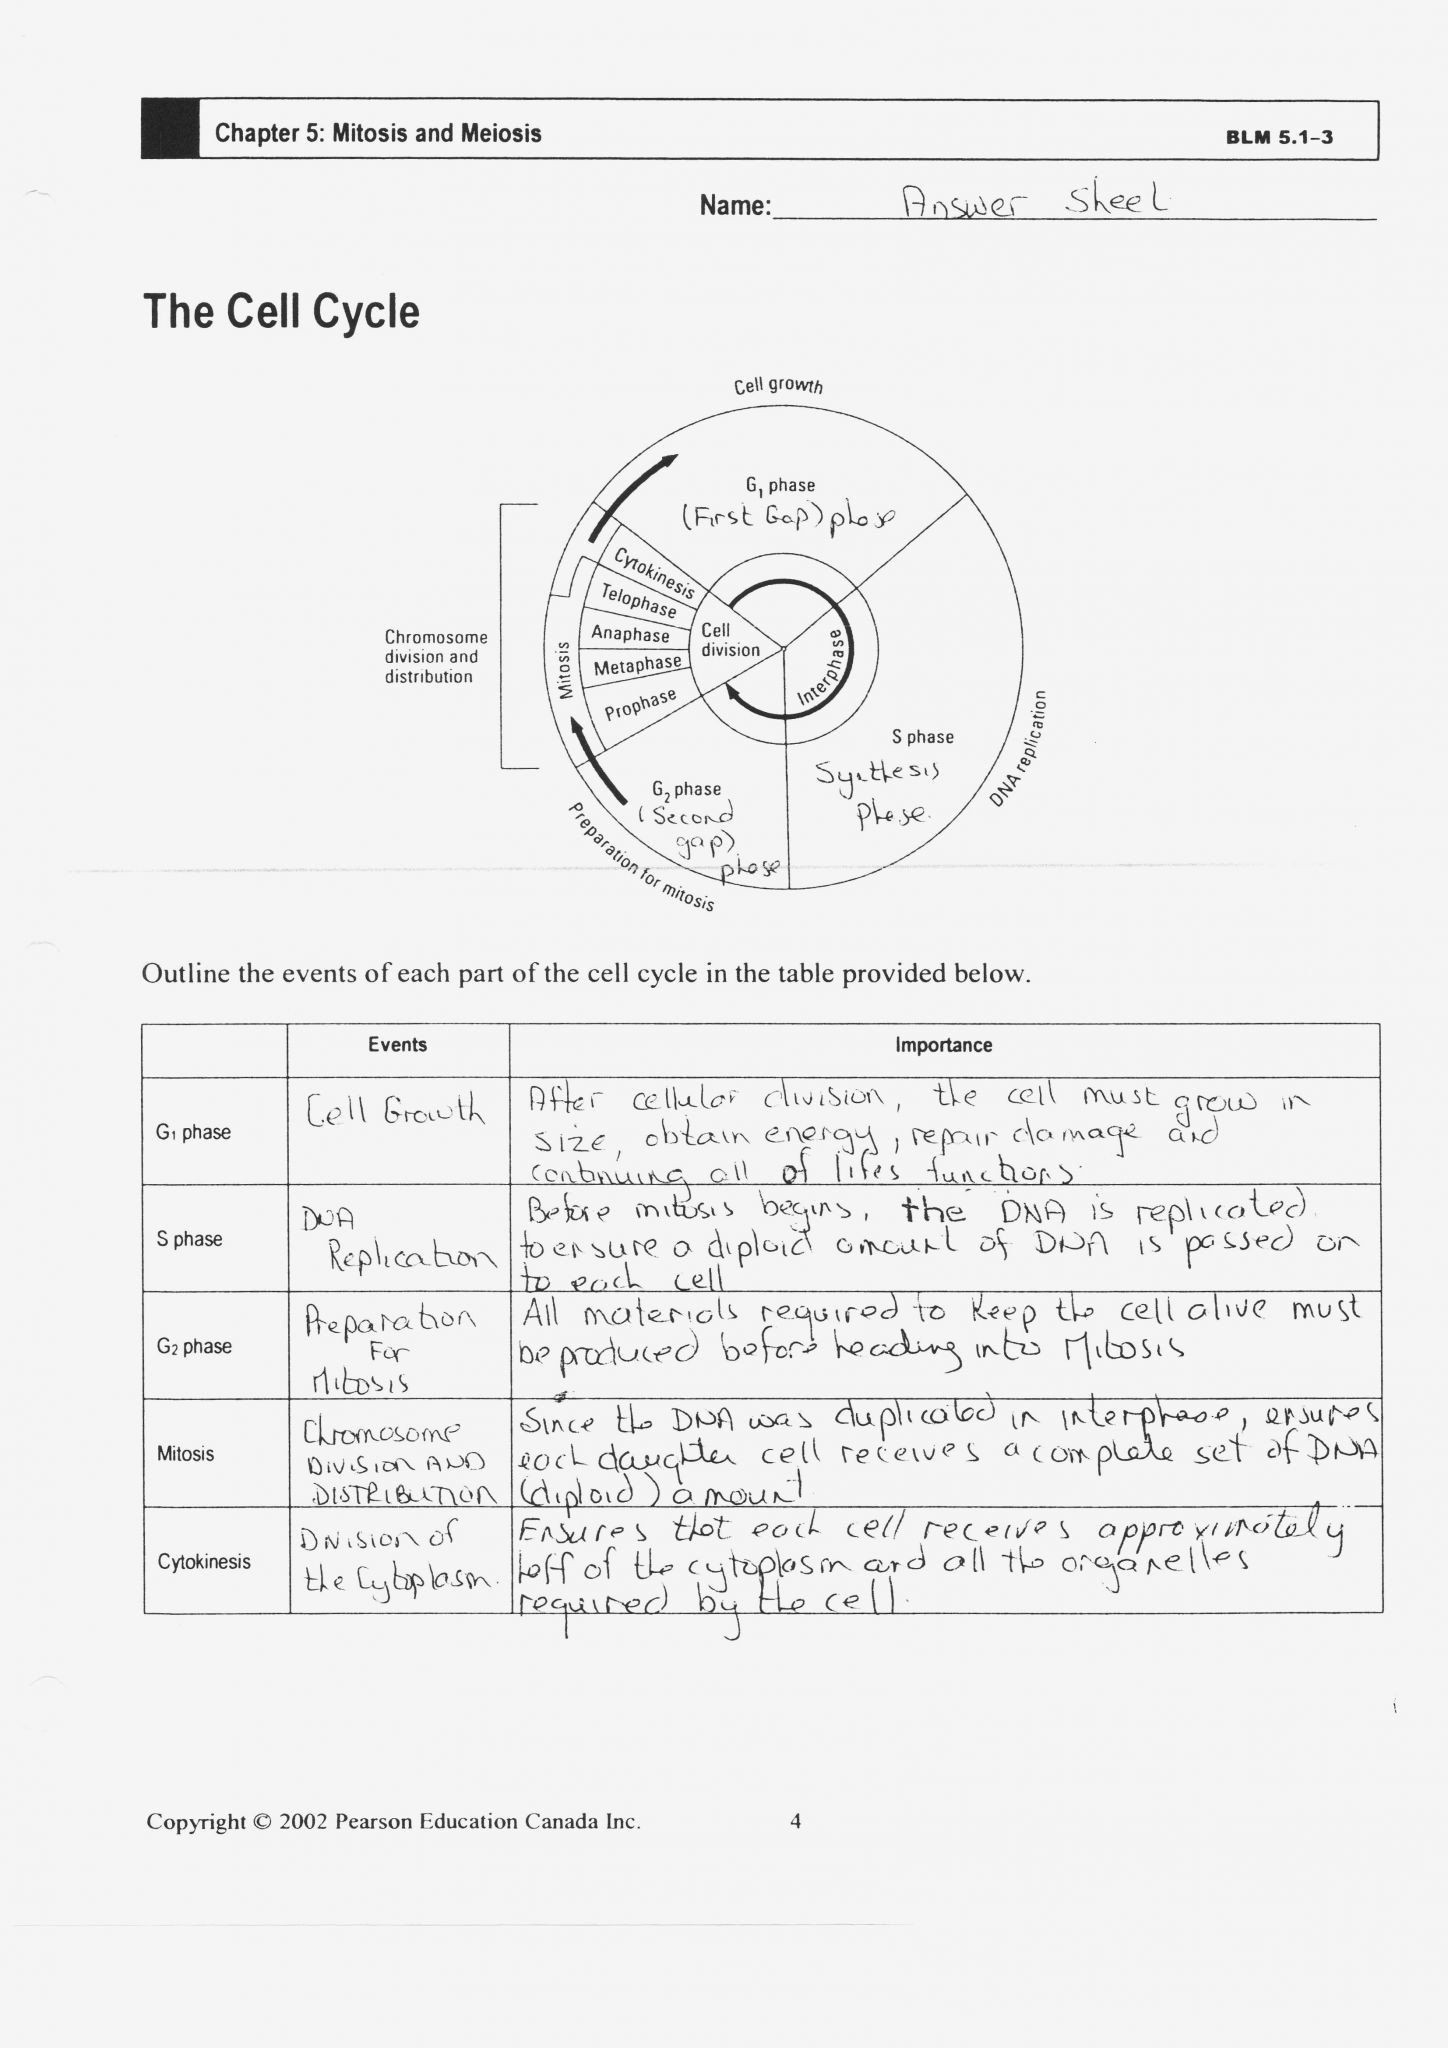 Cell Cycle and Mitosis Worksheet Cell Cycle and Mitosis Worksheet Cell Cycle and Mitosis